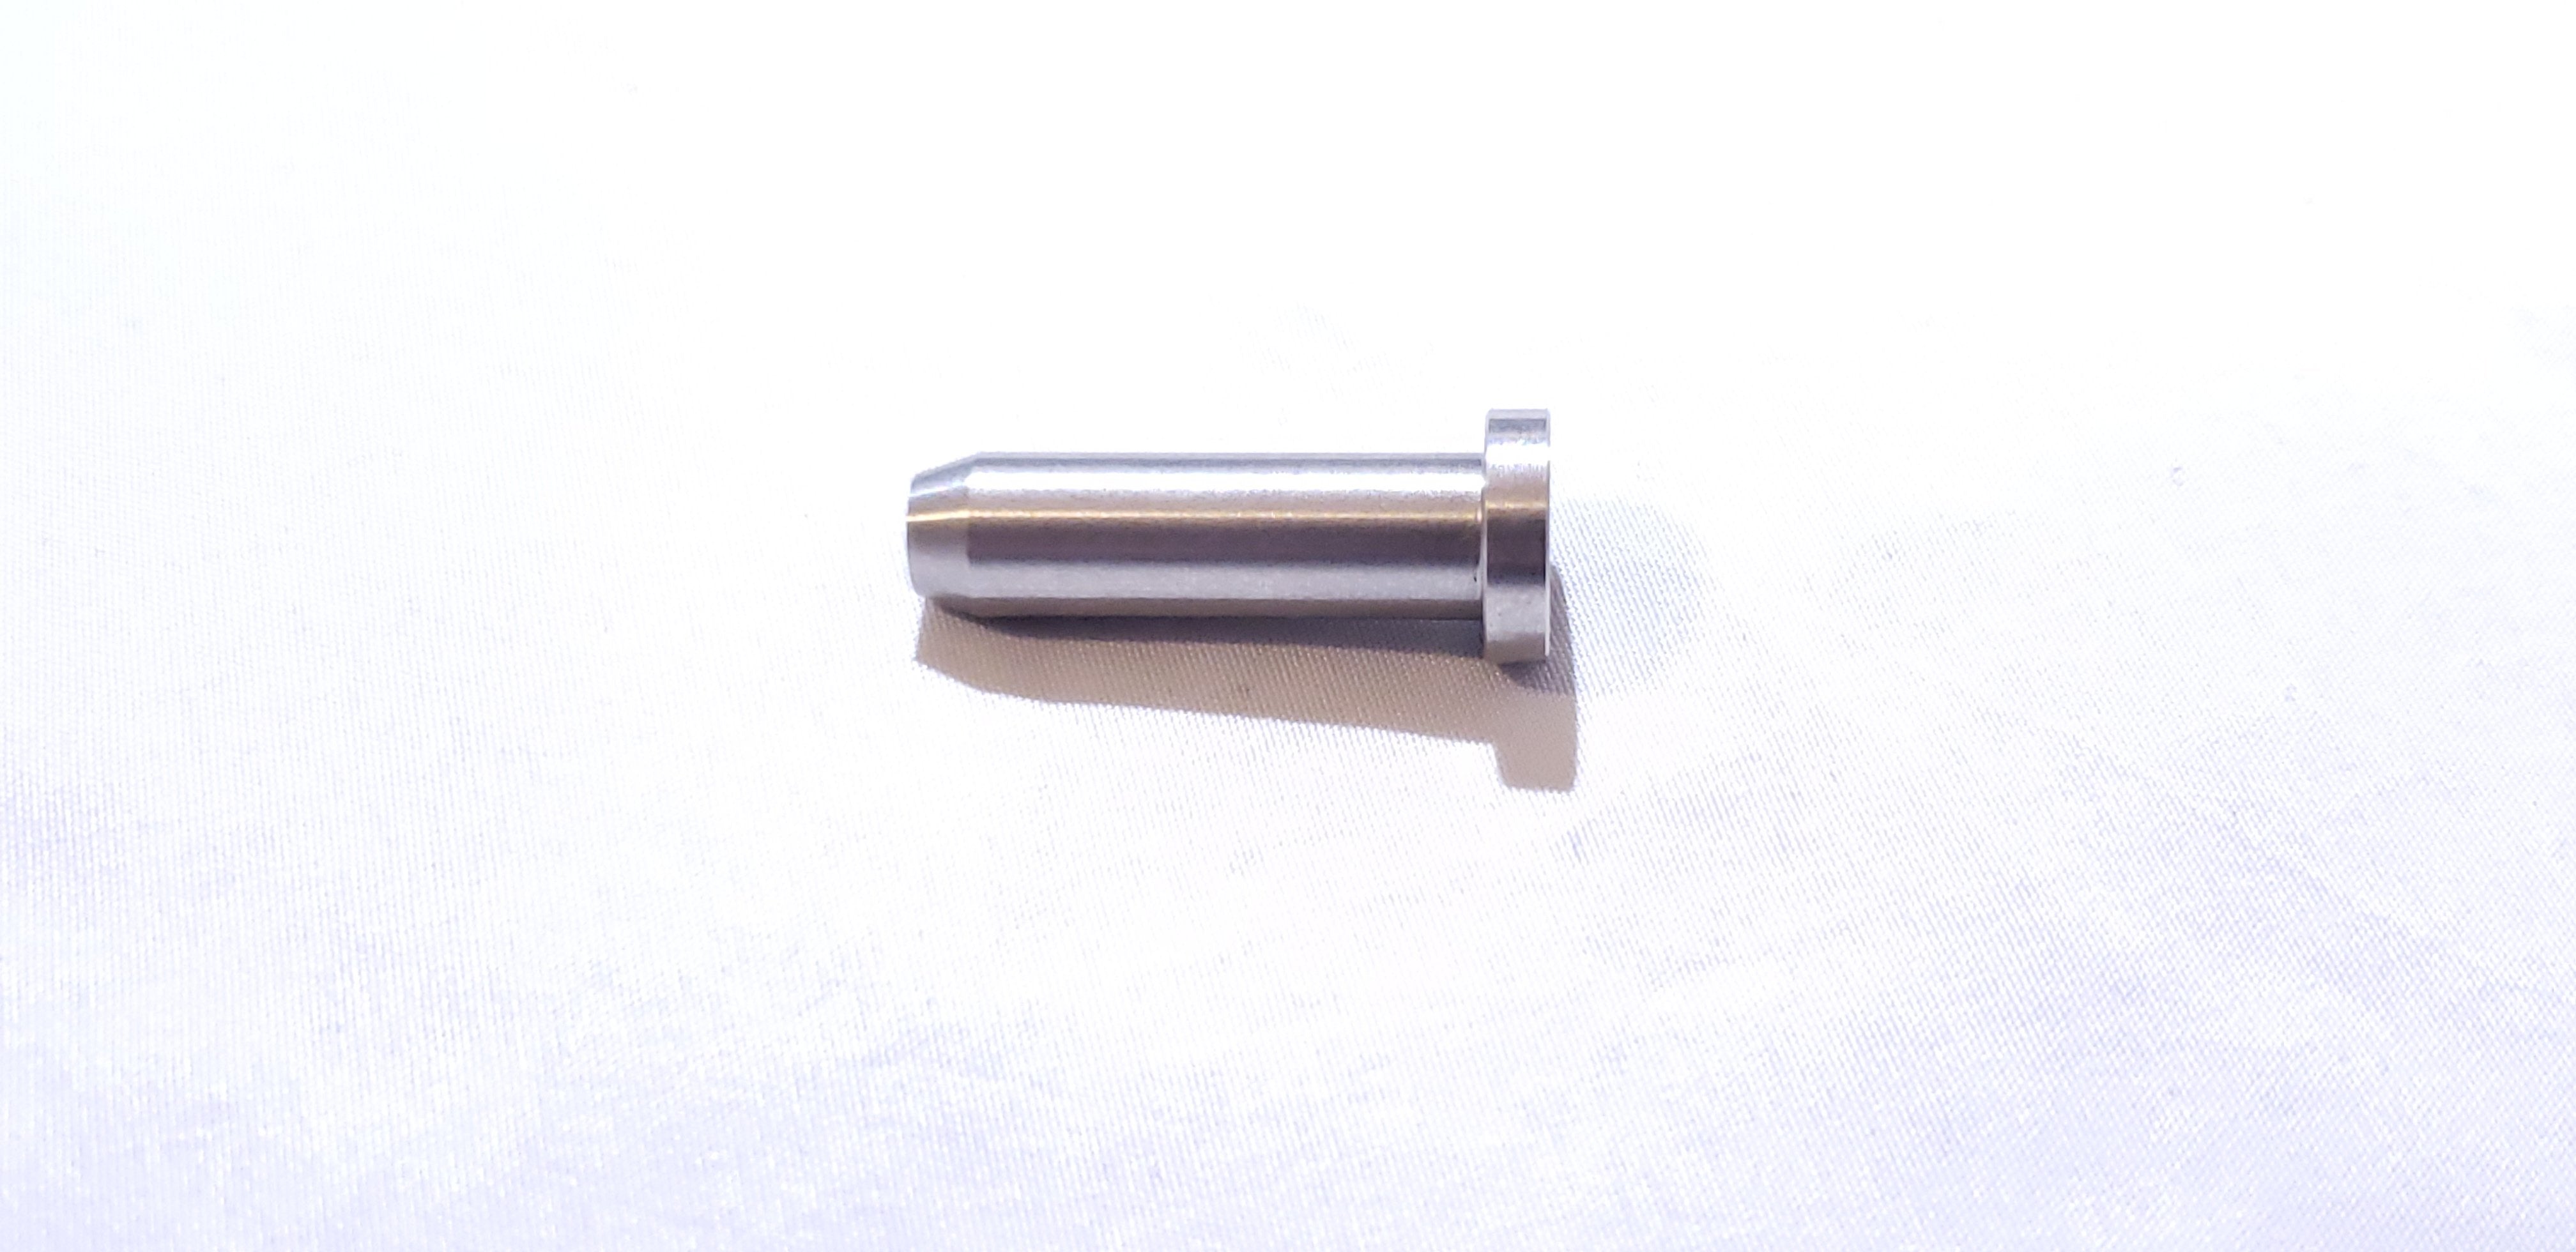 Stainless Steel Hammer Weight for FX Impact Mk1